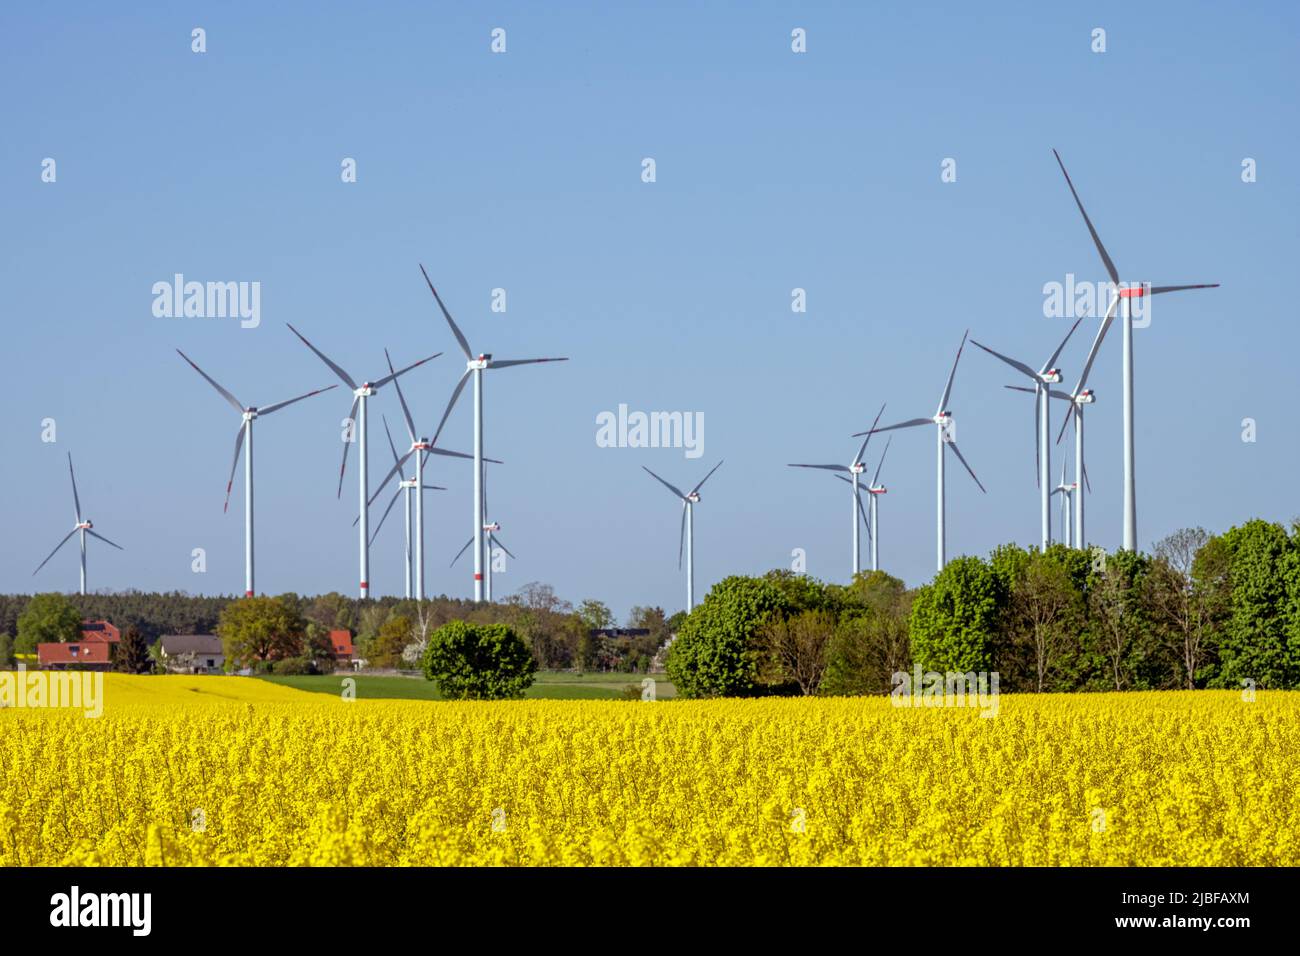 Flowering canola field with wind turbines in the back seen in Germany Stock Photo